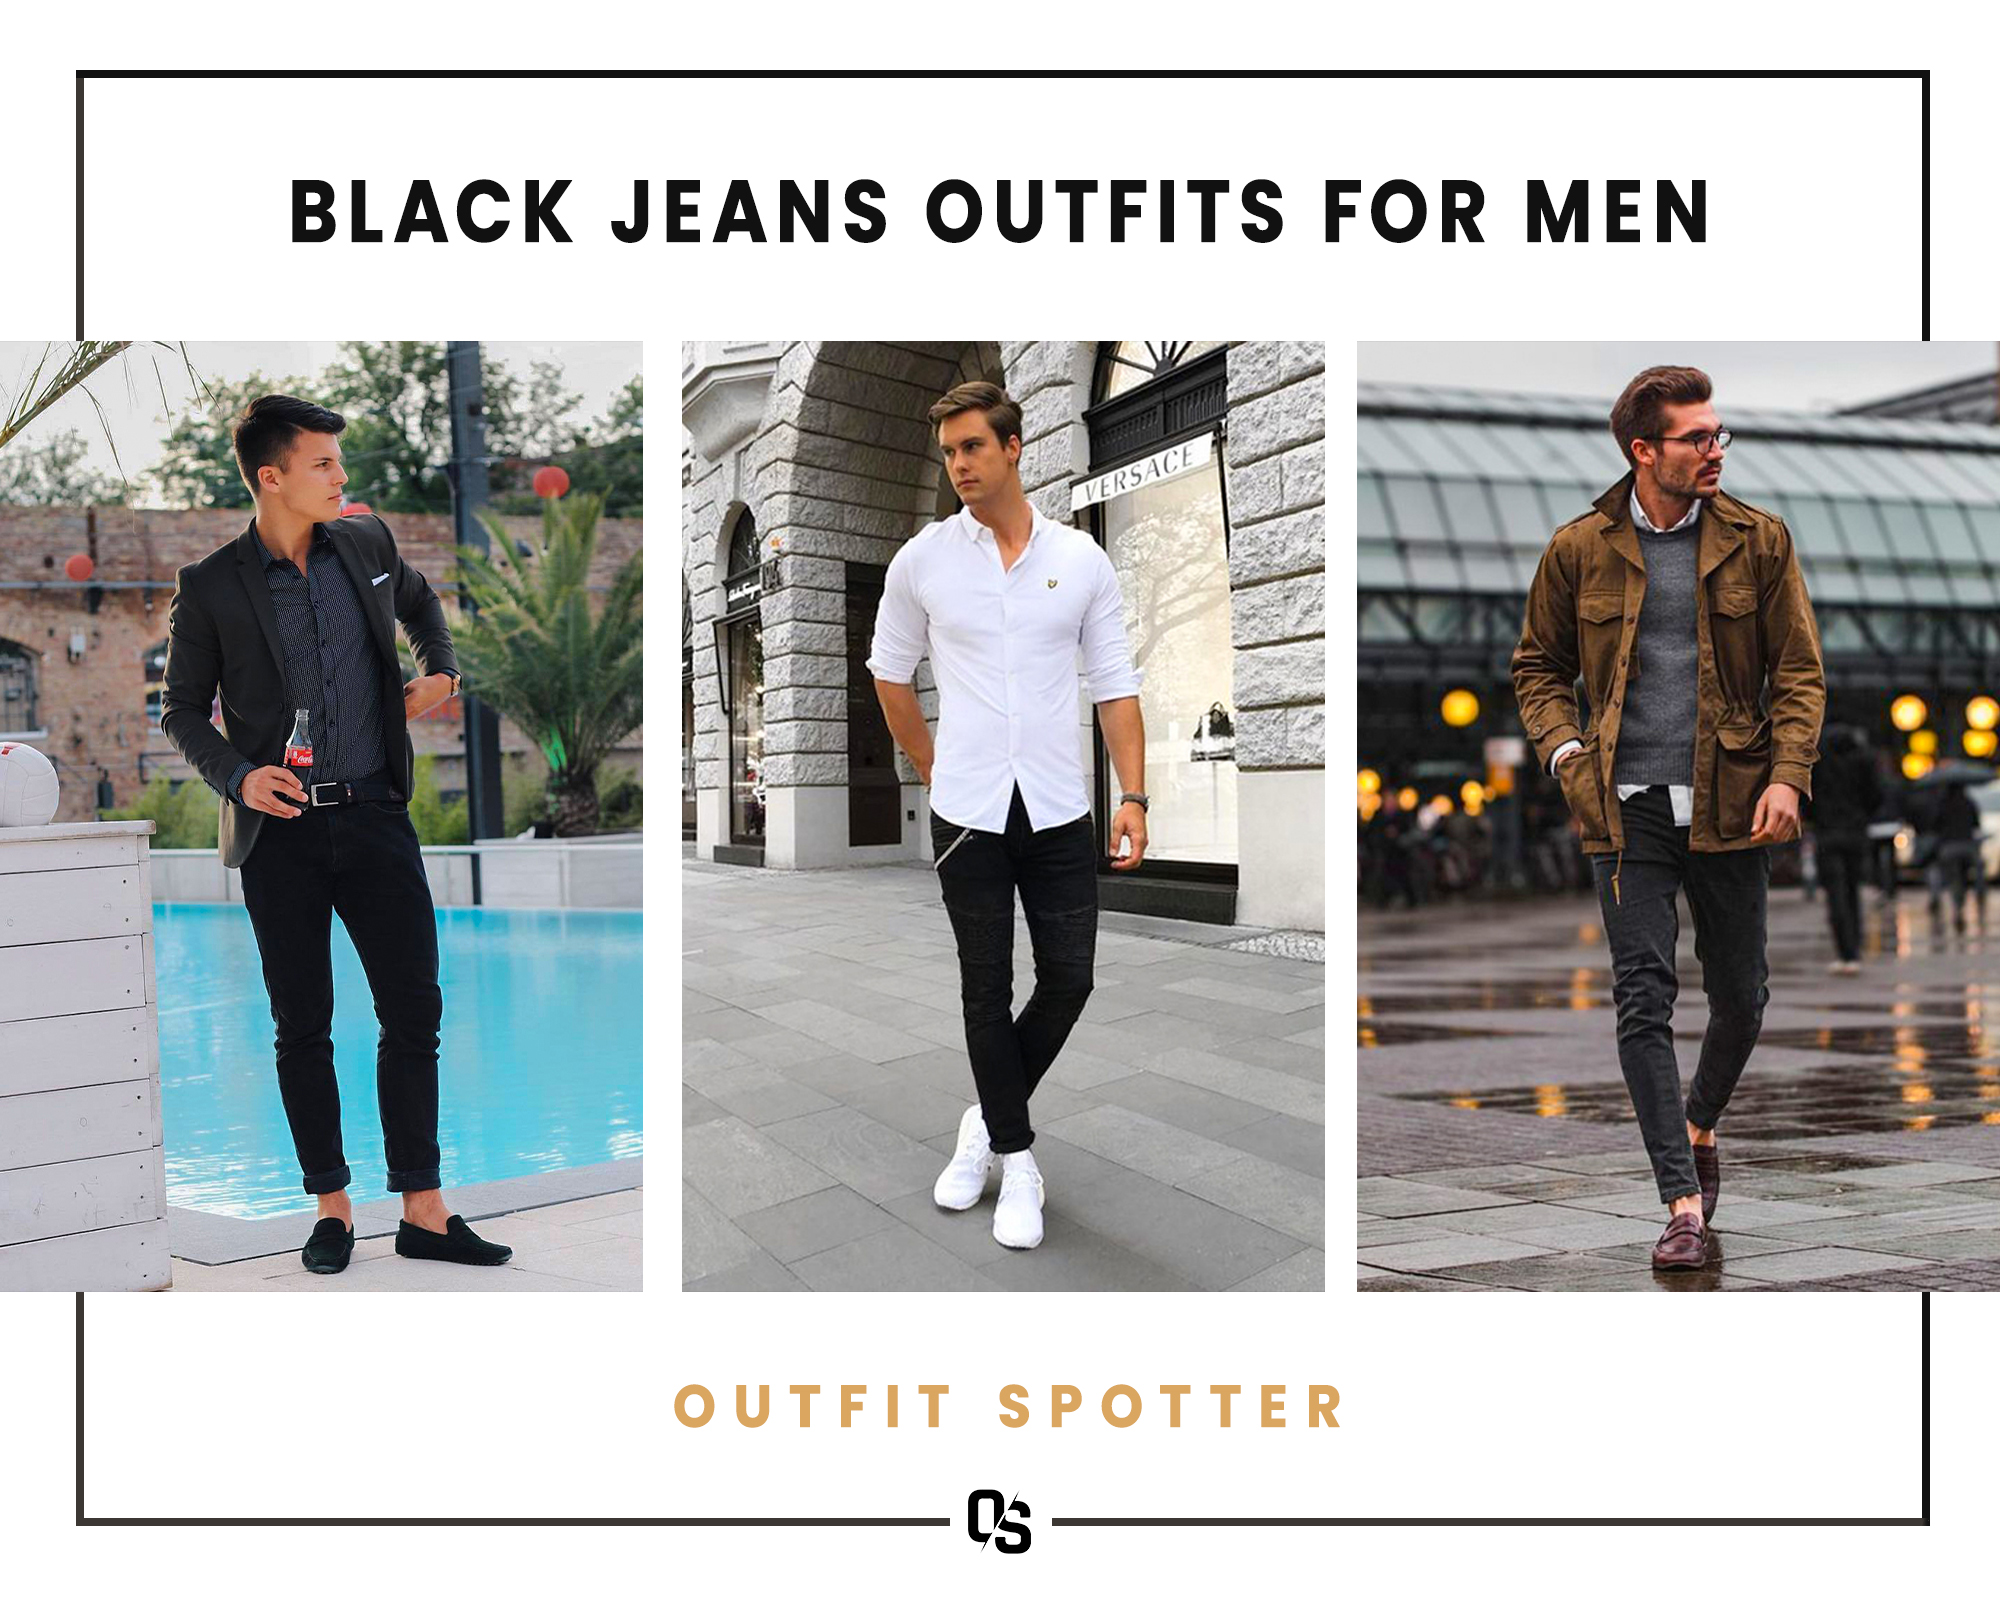 Black Jeans Outfits For Men: 34 Ways To Style Black Jeans | eduaspirant.com